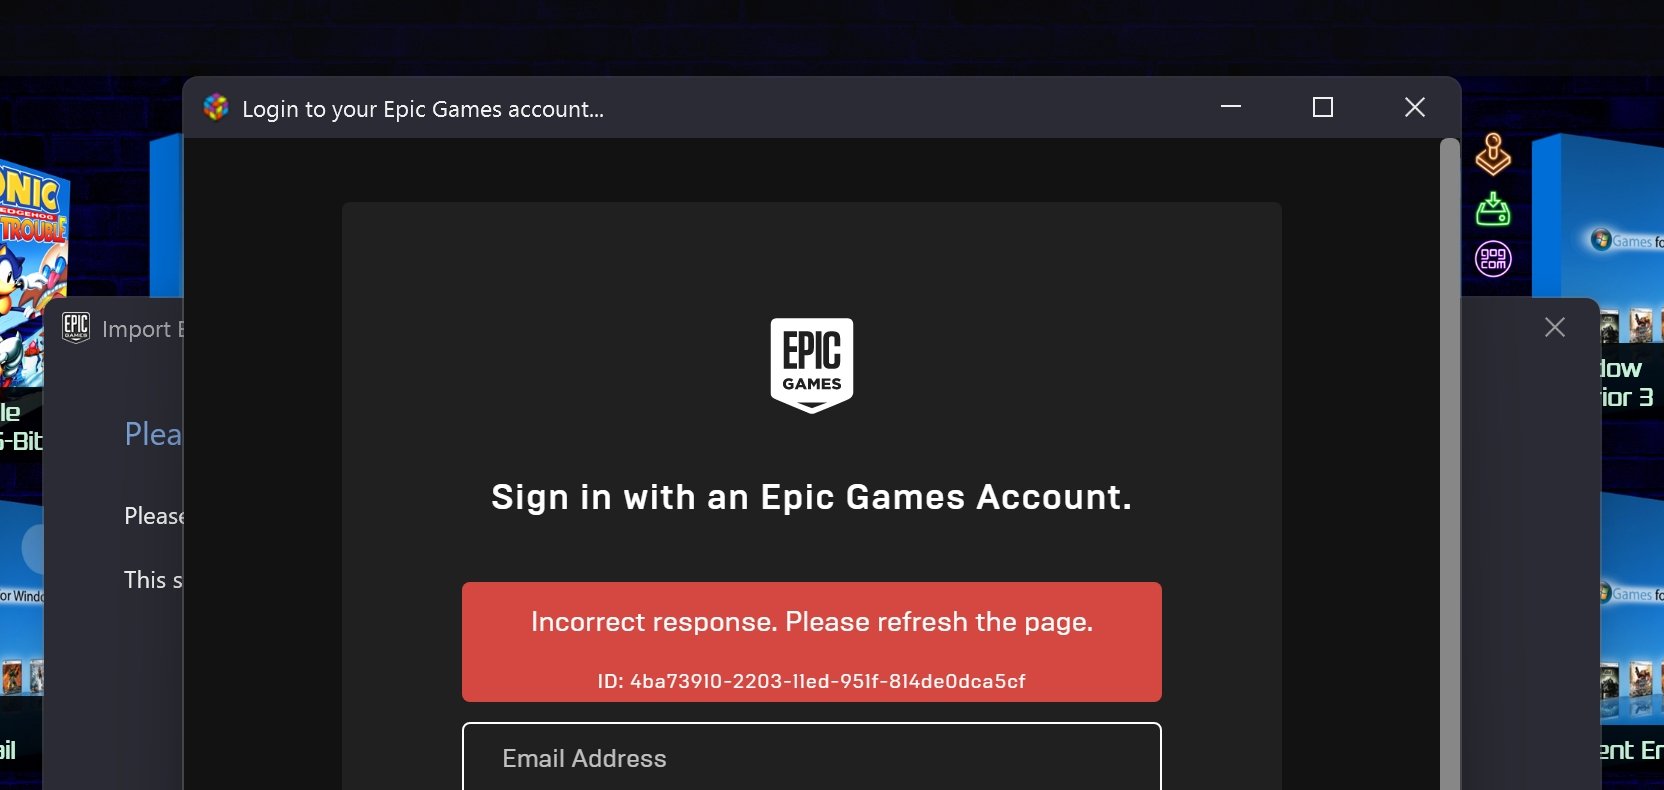 Epic Games Launcher will receive a fix for high CPU usage bug 